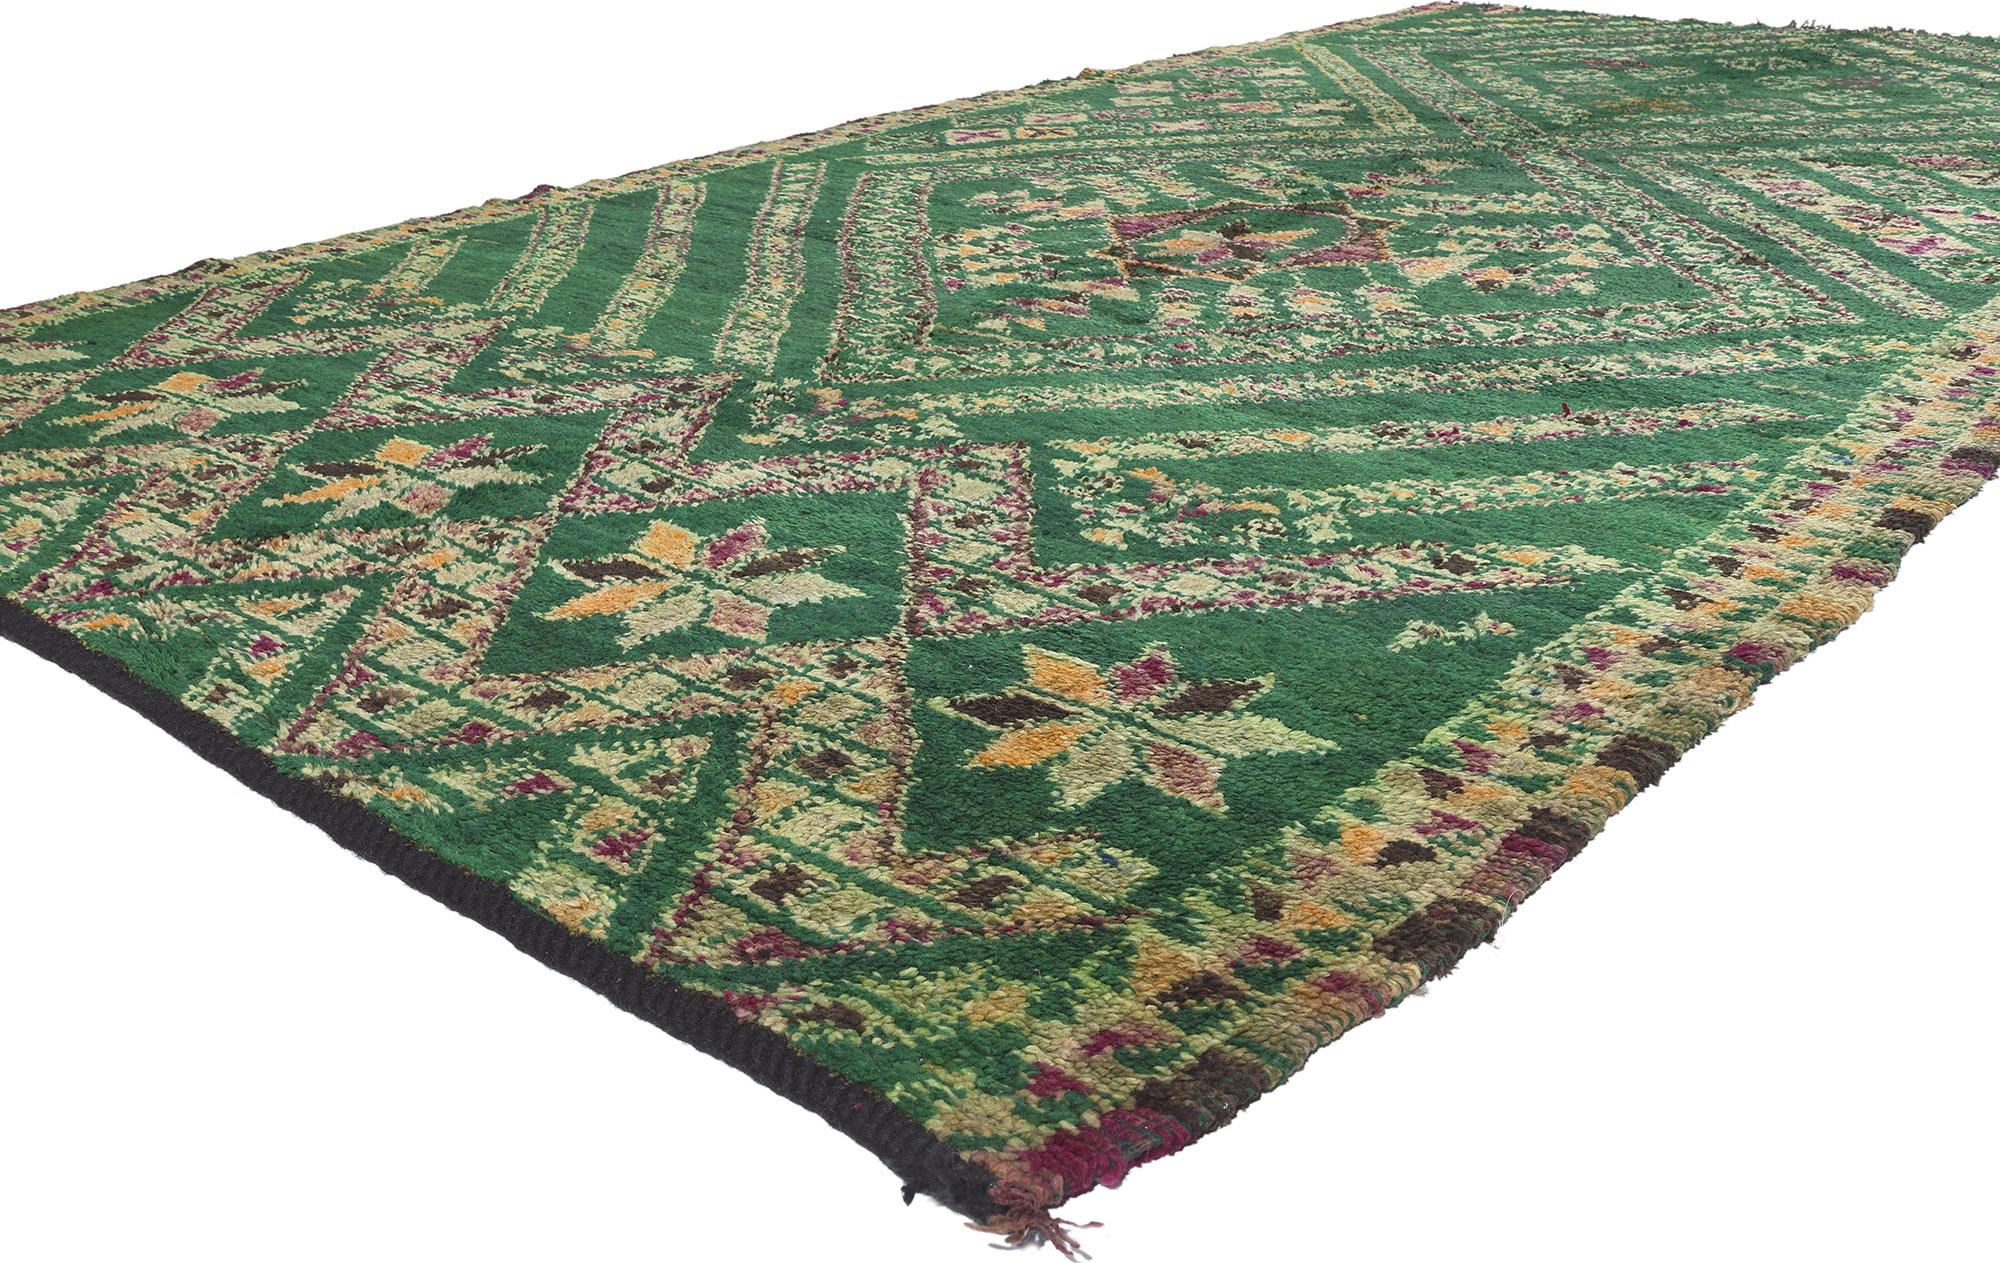 20124 Vintage Green Beni MGuild Moroccan Rug, 06’03 x 12’08. Dive into the harmonious embrace of nature-inspired Biophilic Design seamlessly blended with boho chic in this hand knotted wool vintage Beni MGuild Moroccan rug. The captivating diamond